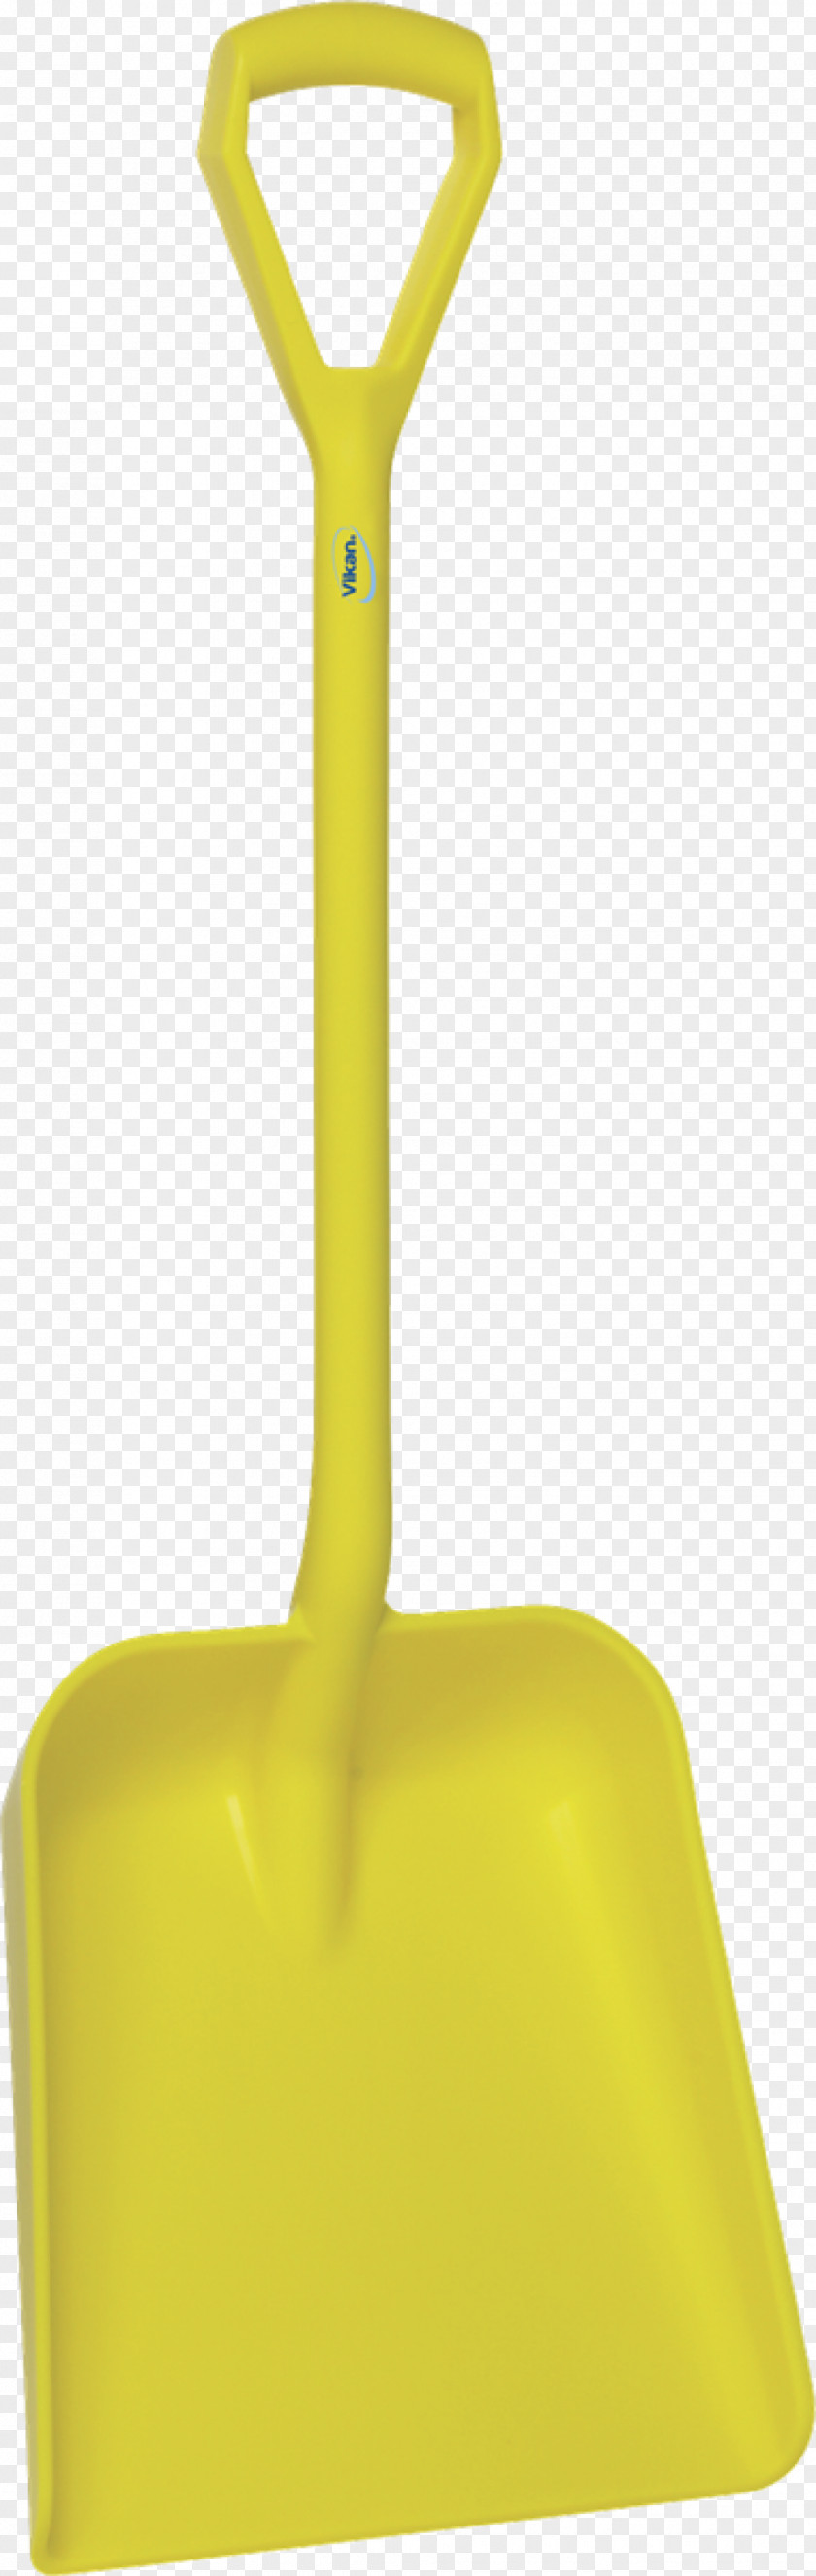 Household Cleaning Supply Yellow Shovel Millimeter Product PNG